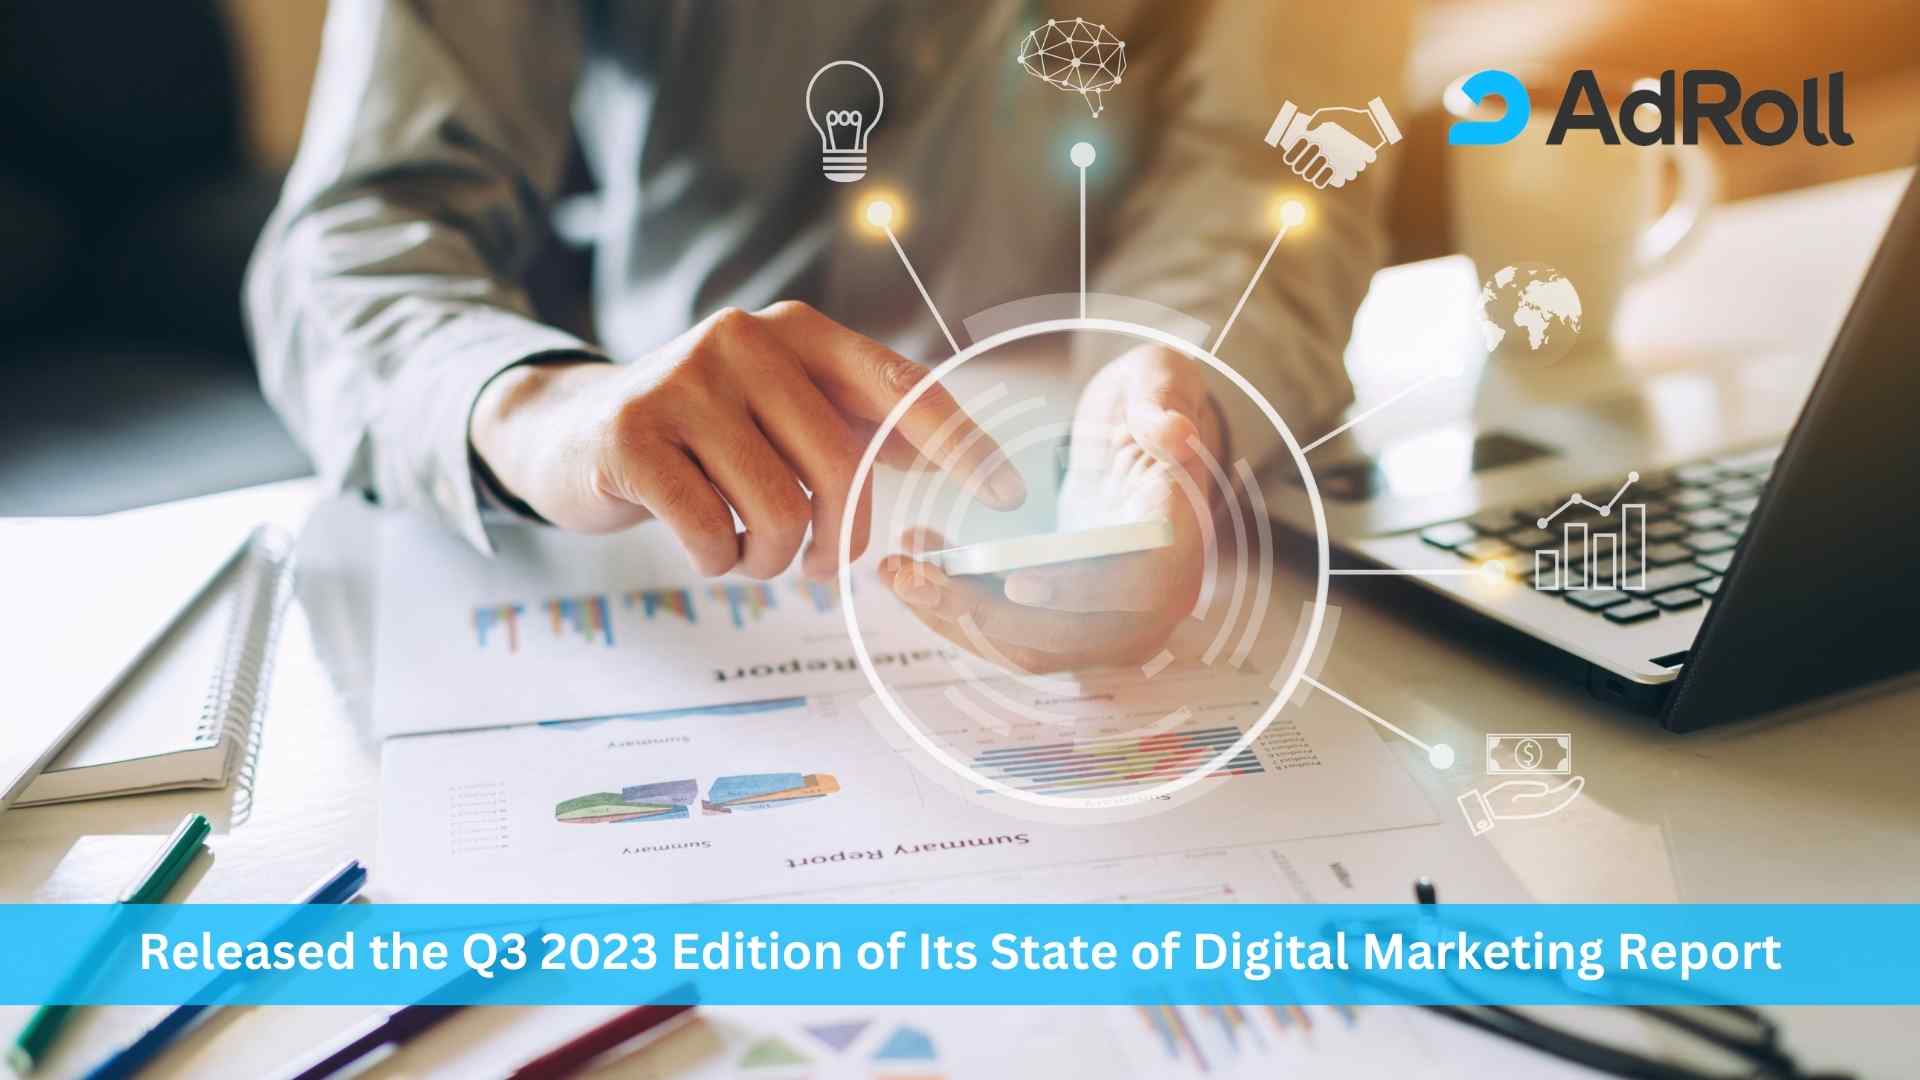 AdRoll’s Q3 2023 State of Digital Marketing Report Reveals a 50% Drop in CPM, Highlighting Opportunity for Marketers Ahead of the Holiday Season